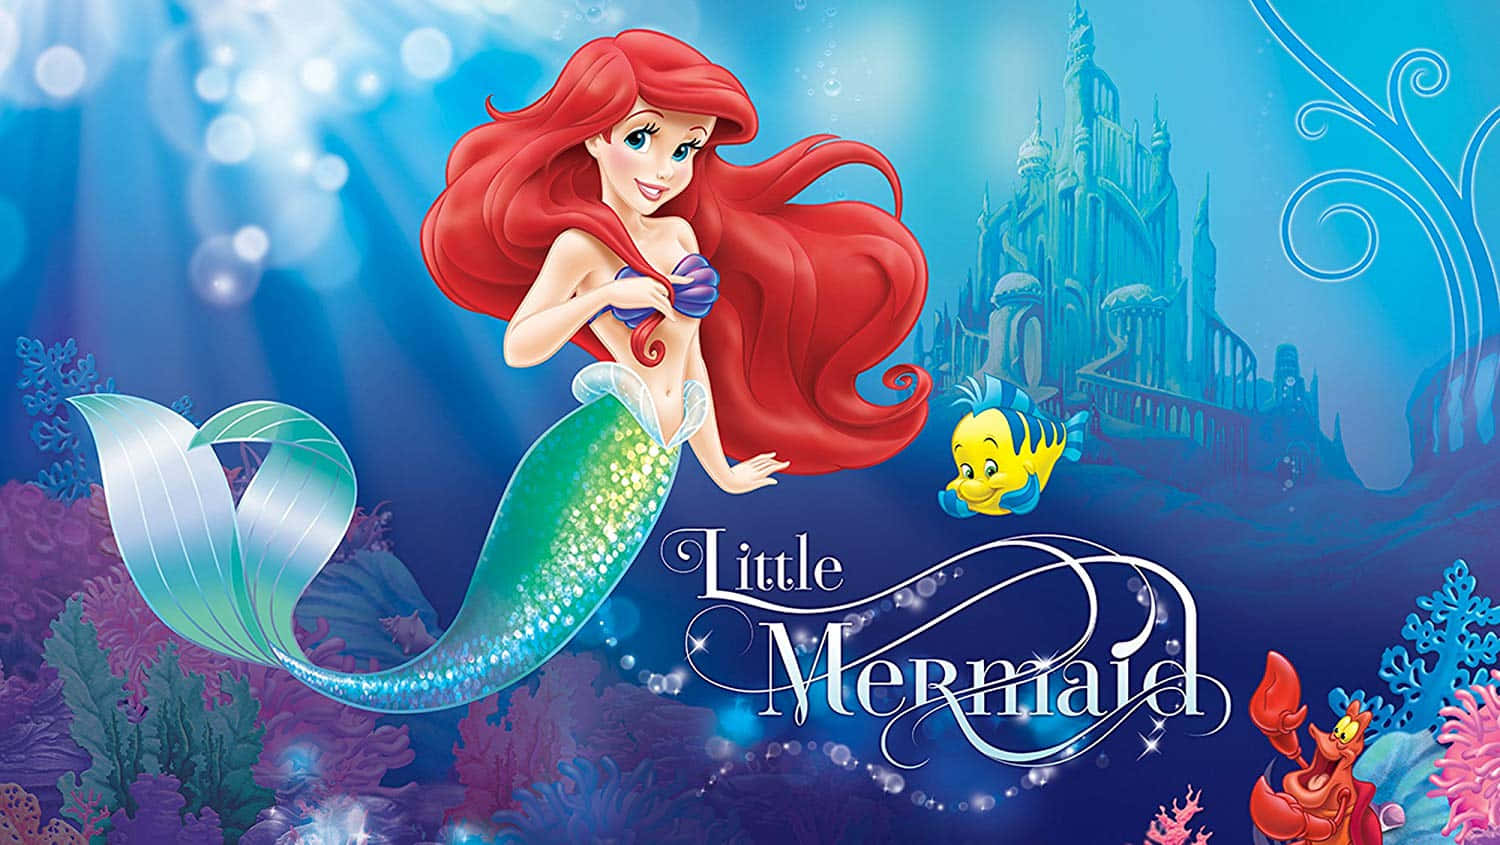 Pin by ΛNDRALEF  on A PEQUENA SEREIA  Disney background Mermaid  wallpapers Disney princess pictures